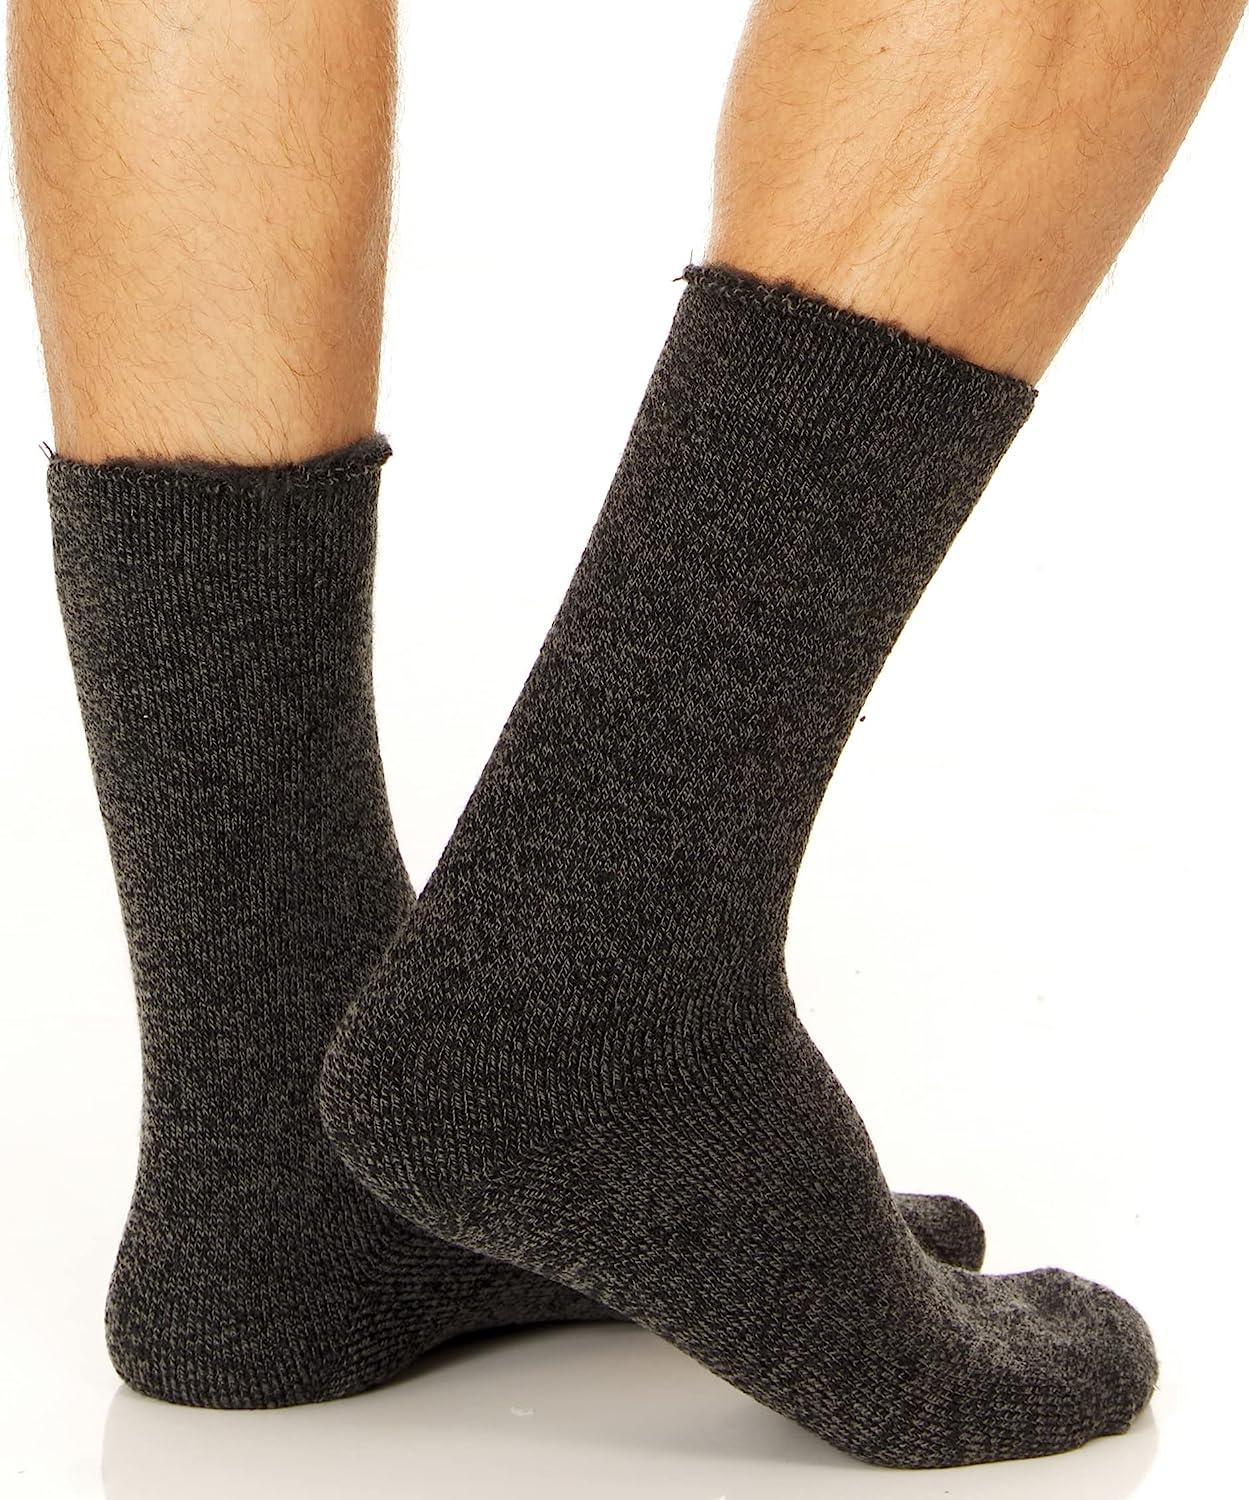 UNIQUE STYLES ASFOOR Set of 3 Thermal Socks for Men Heated Cold Weather  Socks Men Warm Insulated Socks for Winter 7-12 Black/Charcoal/Dark Grey